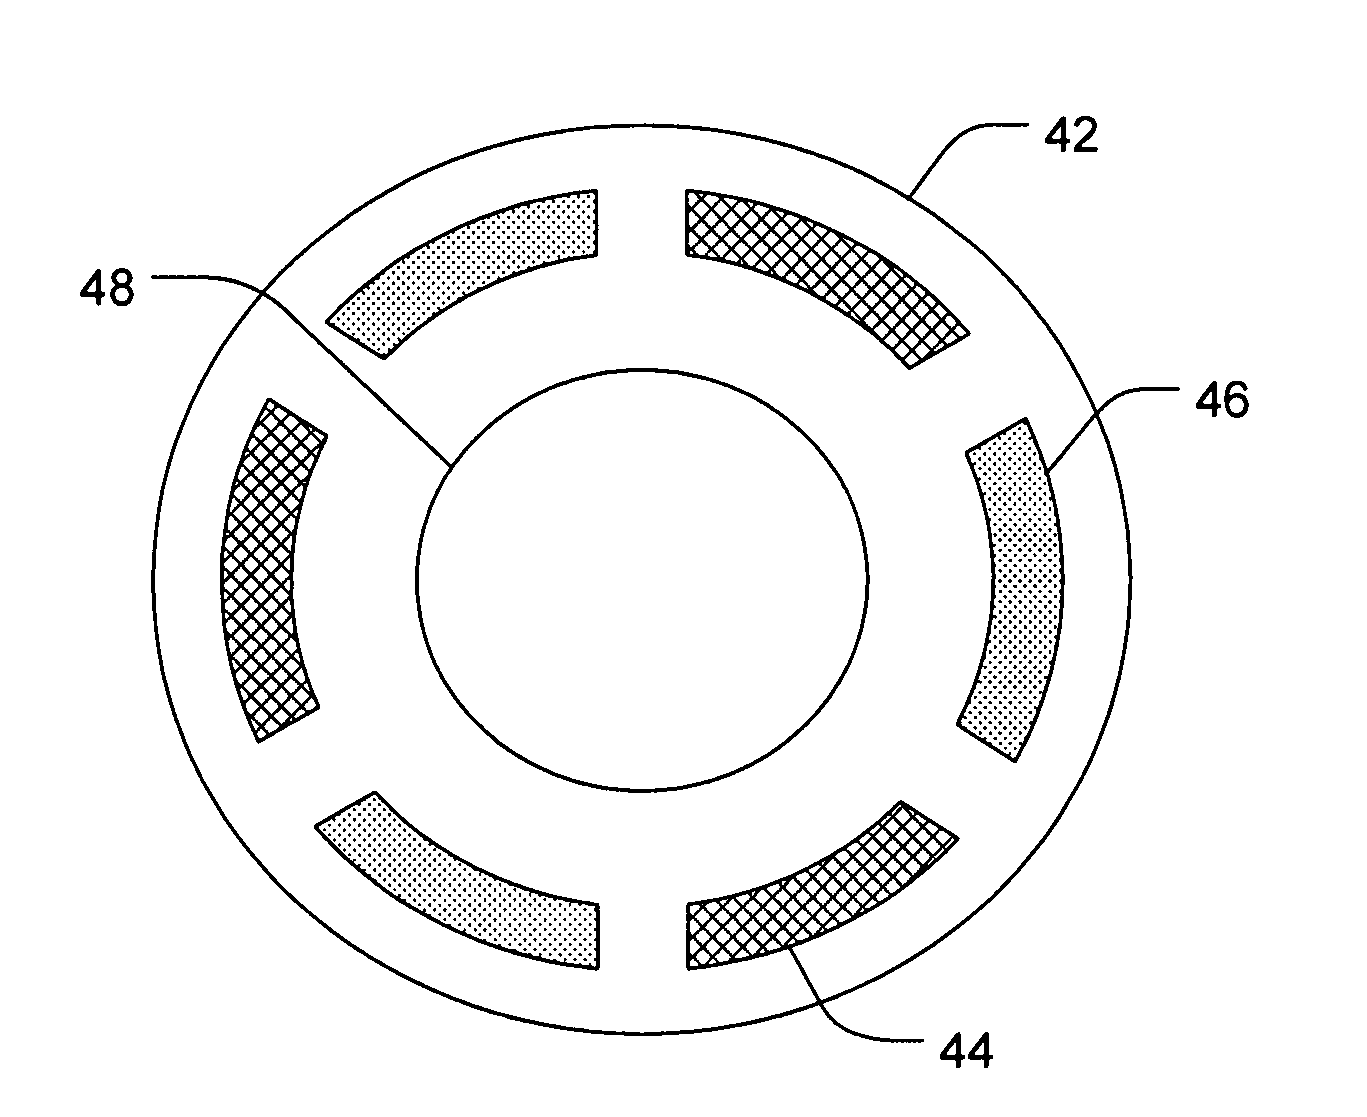 Passive intraocular drug delivery devices and associated methods